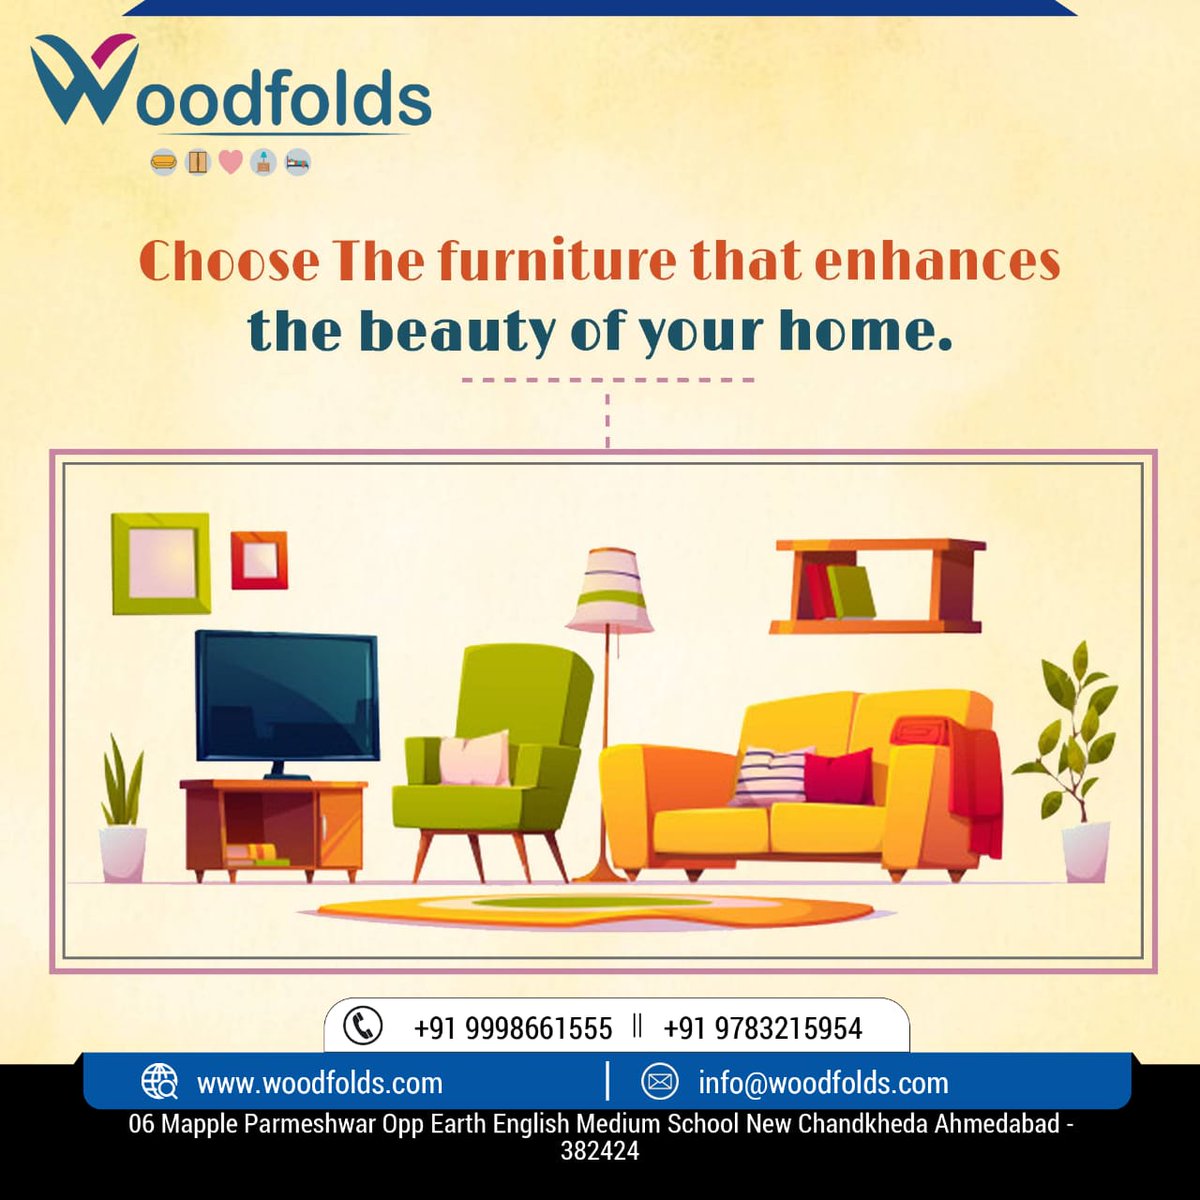 'Choose The furniture that enhances the beauty of your home'
#Woodfodls #Crafted #with #excellence #homefurniture #officefurniture #homedecor #modularkitchen #interior #decor #ModernInteriors #ComfortableFurniture #Furniture #Aesthetics #Sophistication #woodwork  #interiordesign